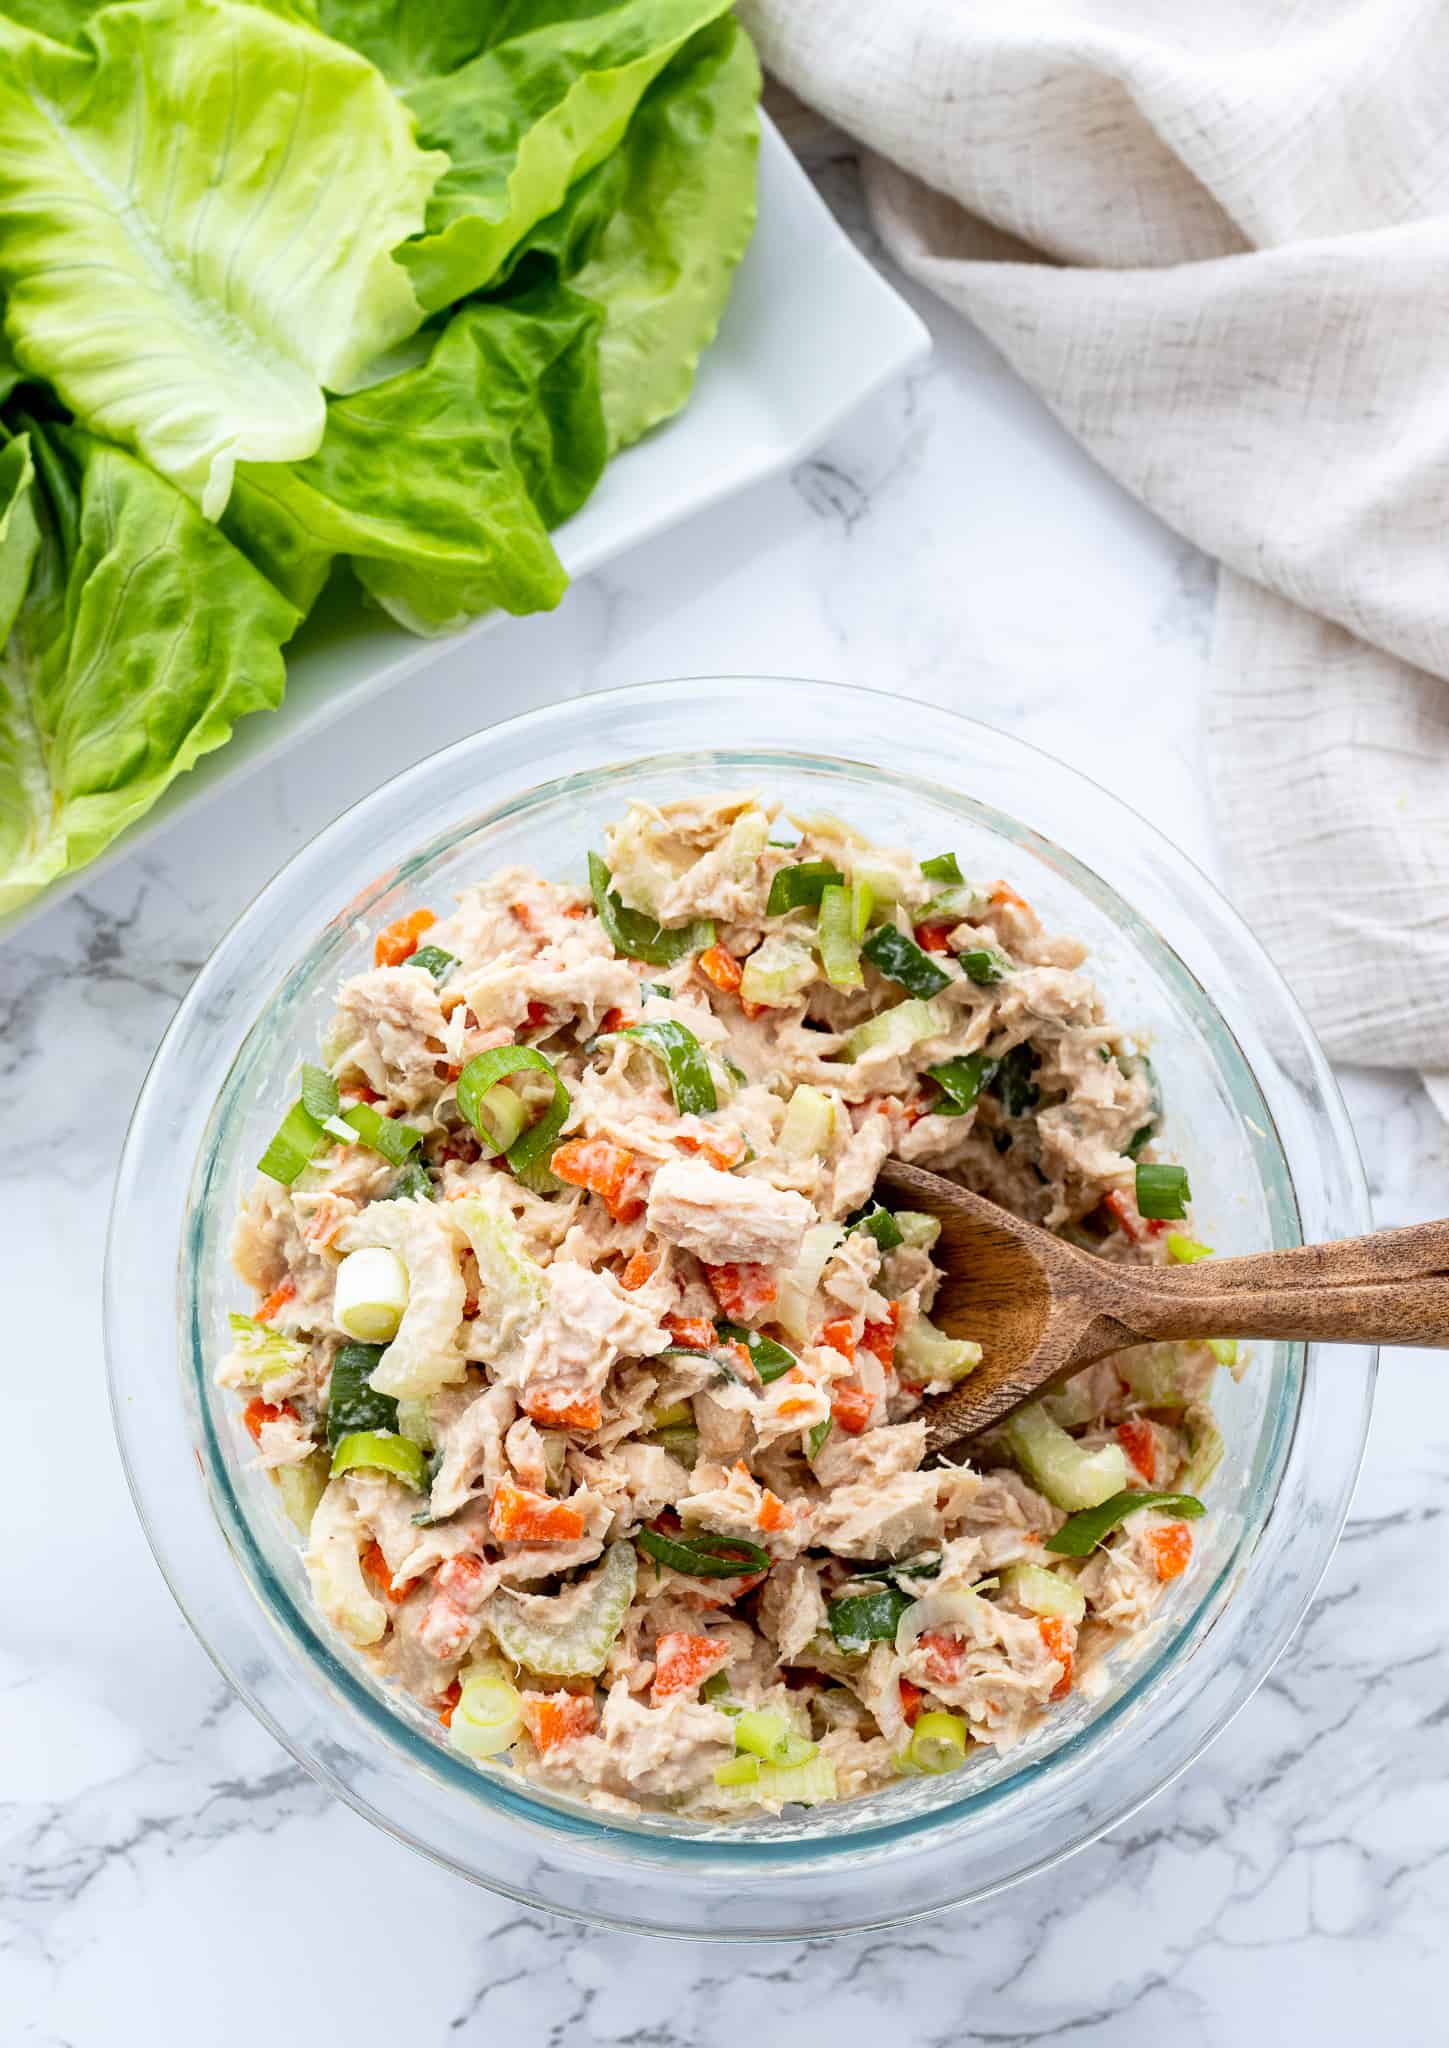 no-mayo tuna salad in bowl with lettuce wraps